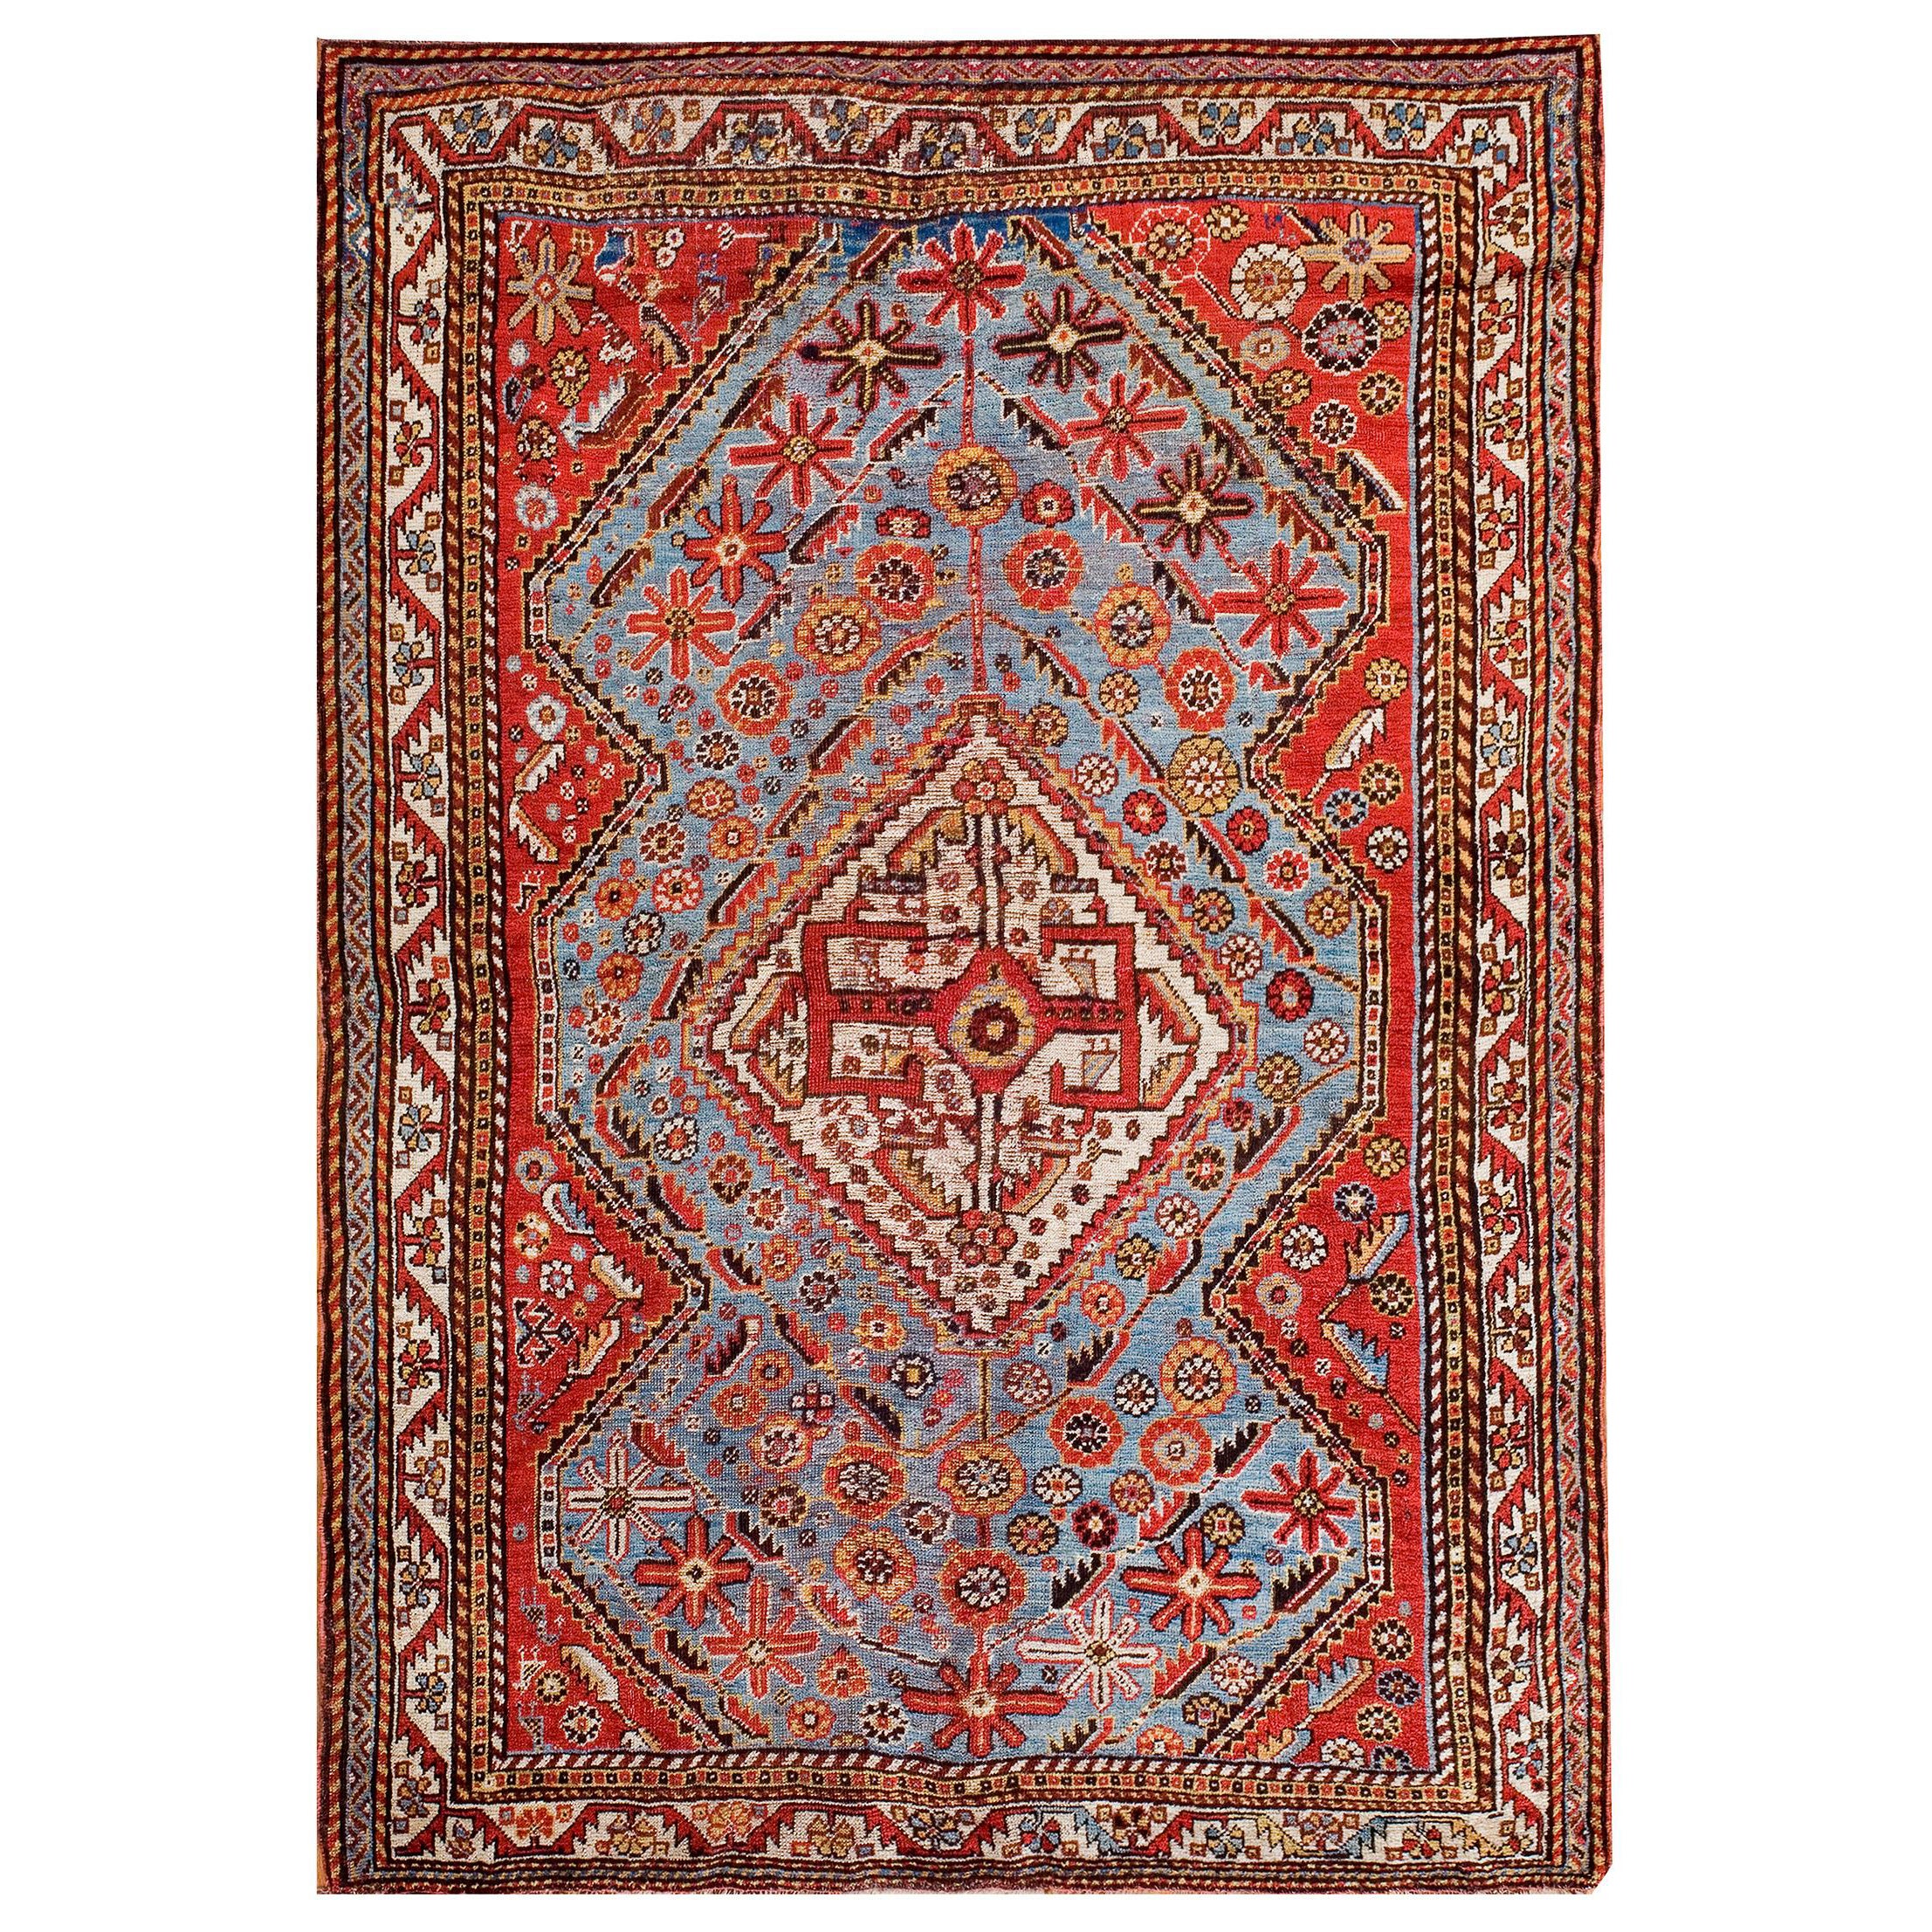 19th Century S. Persian Ghashgaie Rug ( 4'2" x 6'2" - 127 x 188 ) For Sale